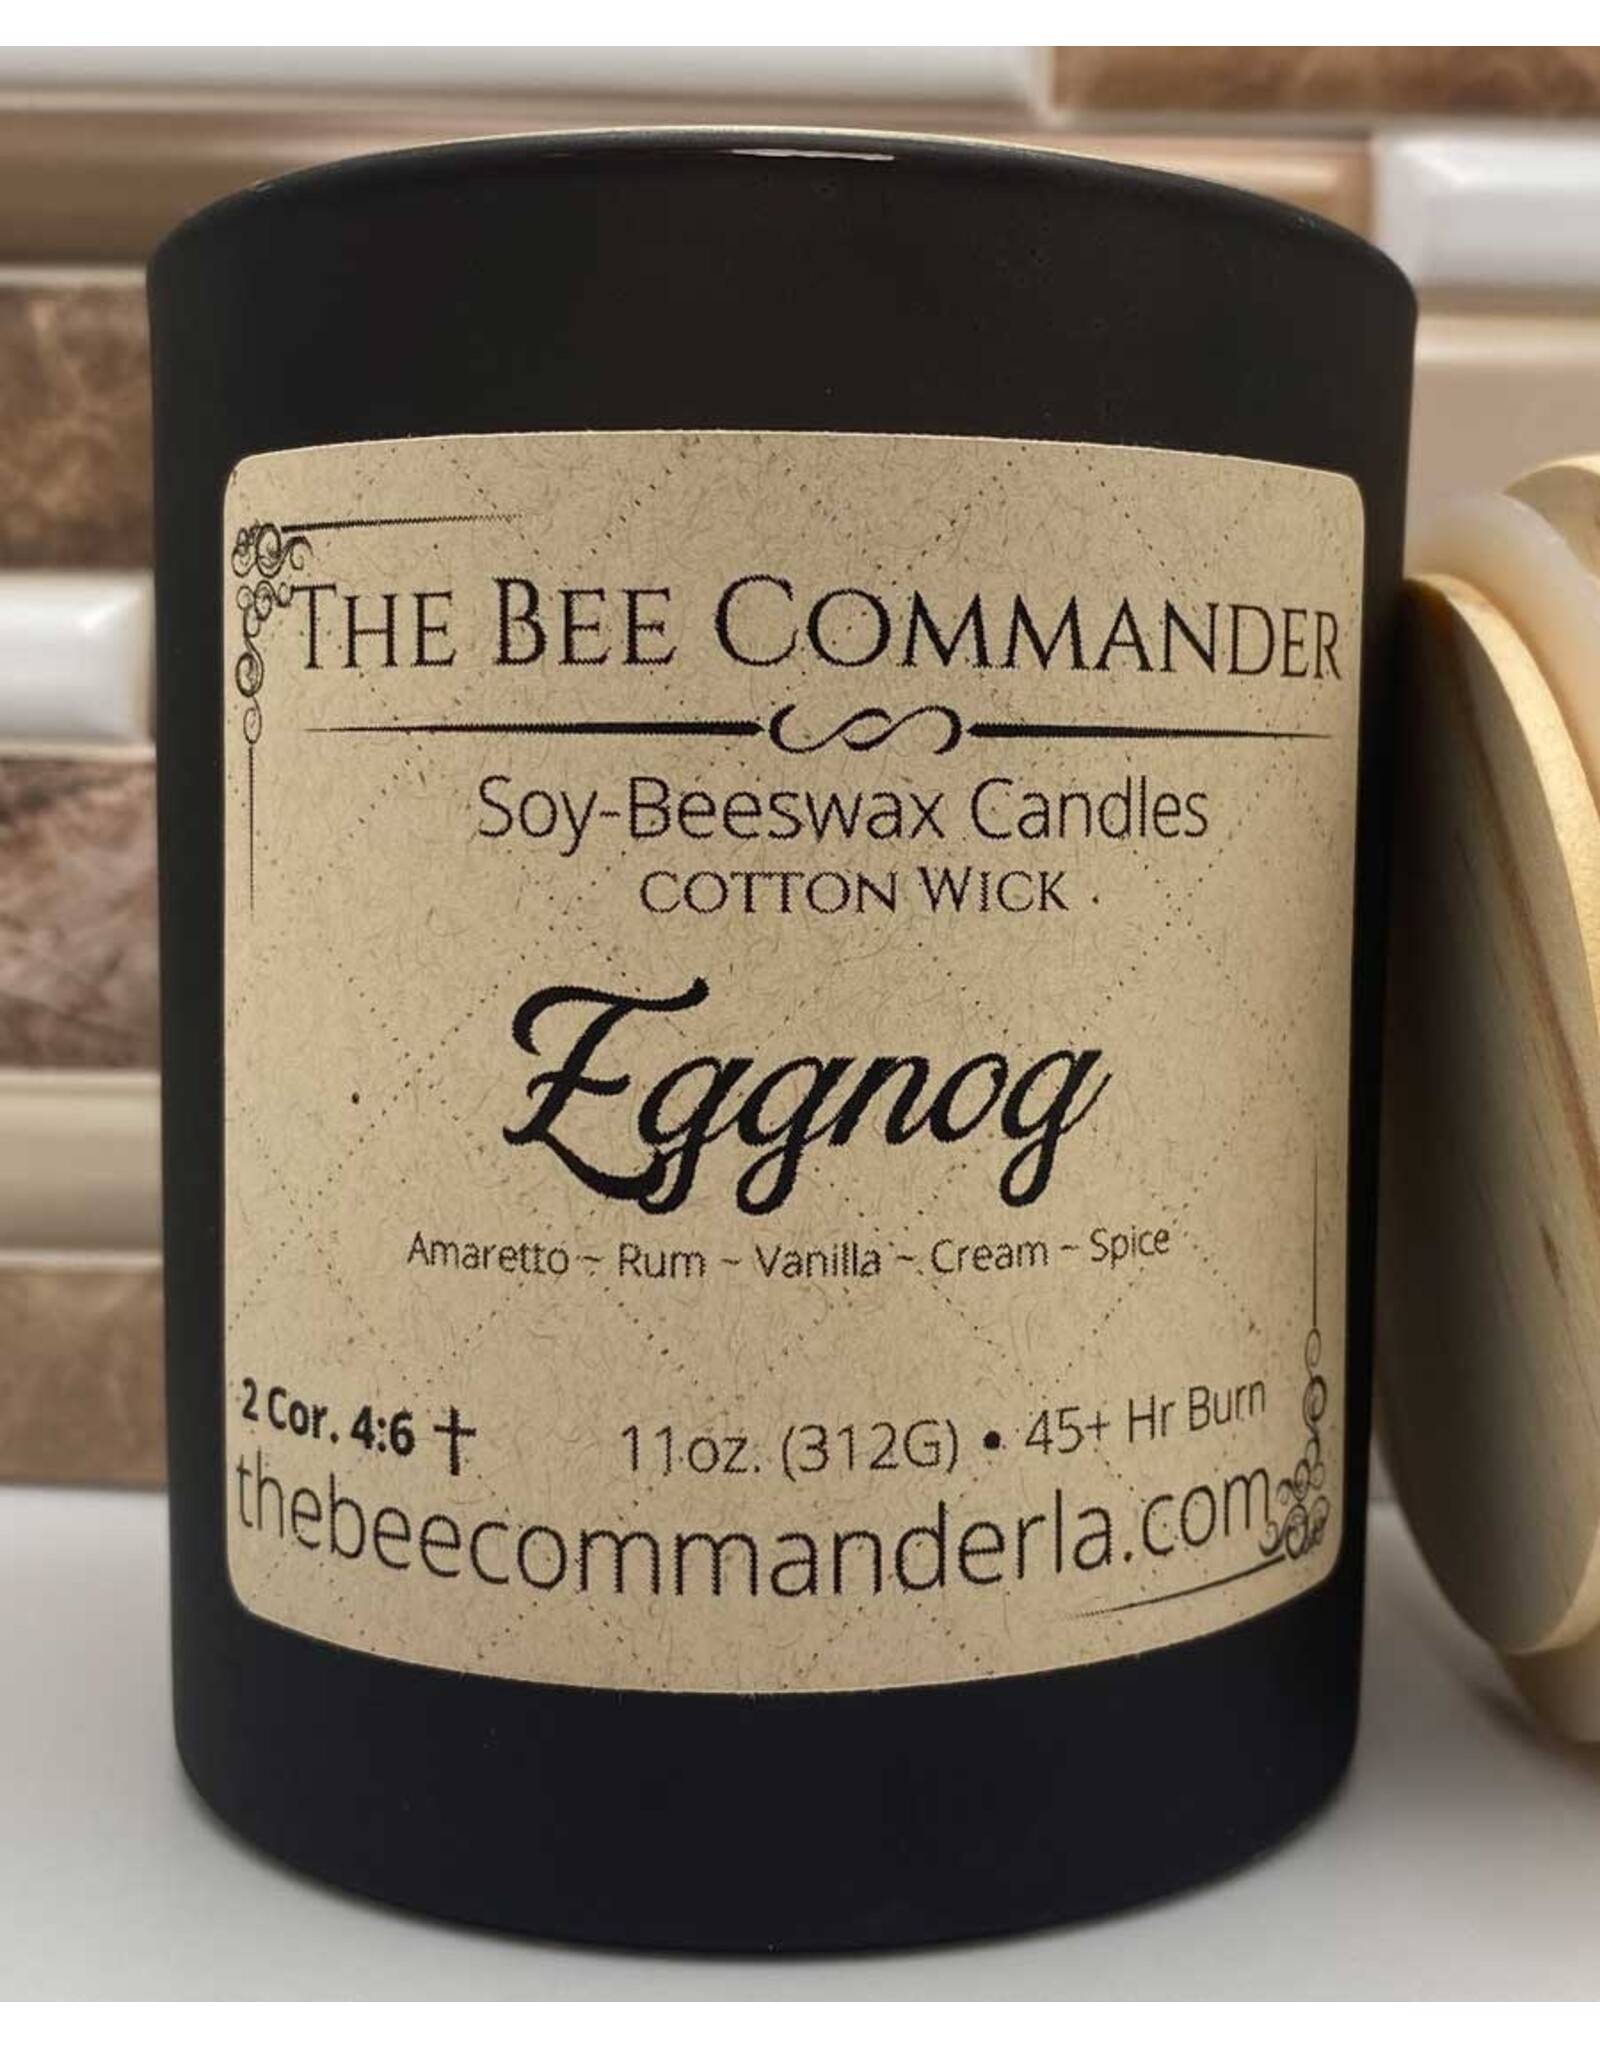 The Bee Commander Eggnog Soy/Beeswax Candle